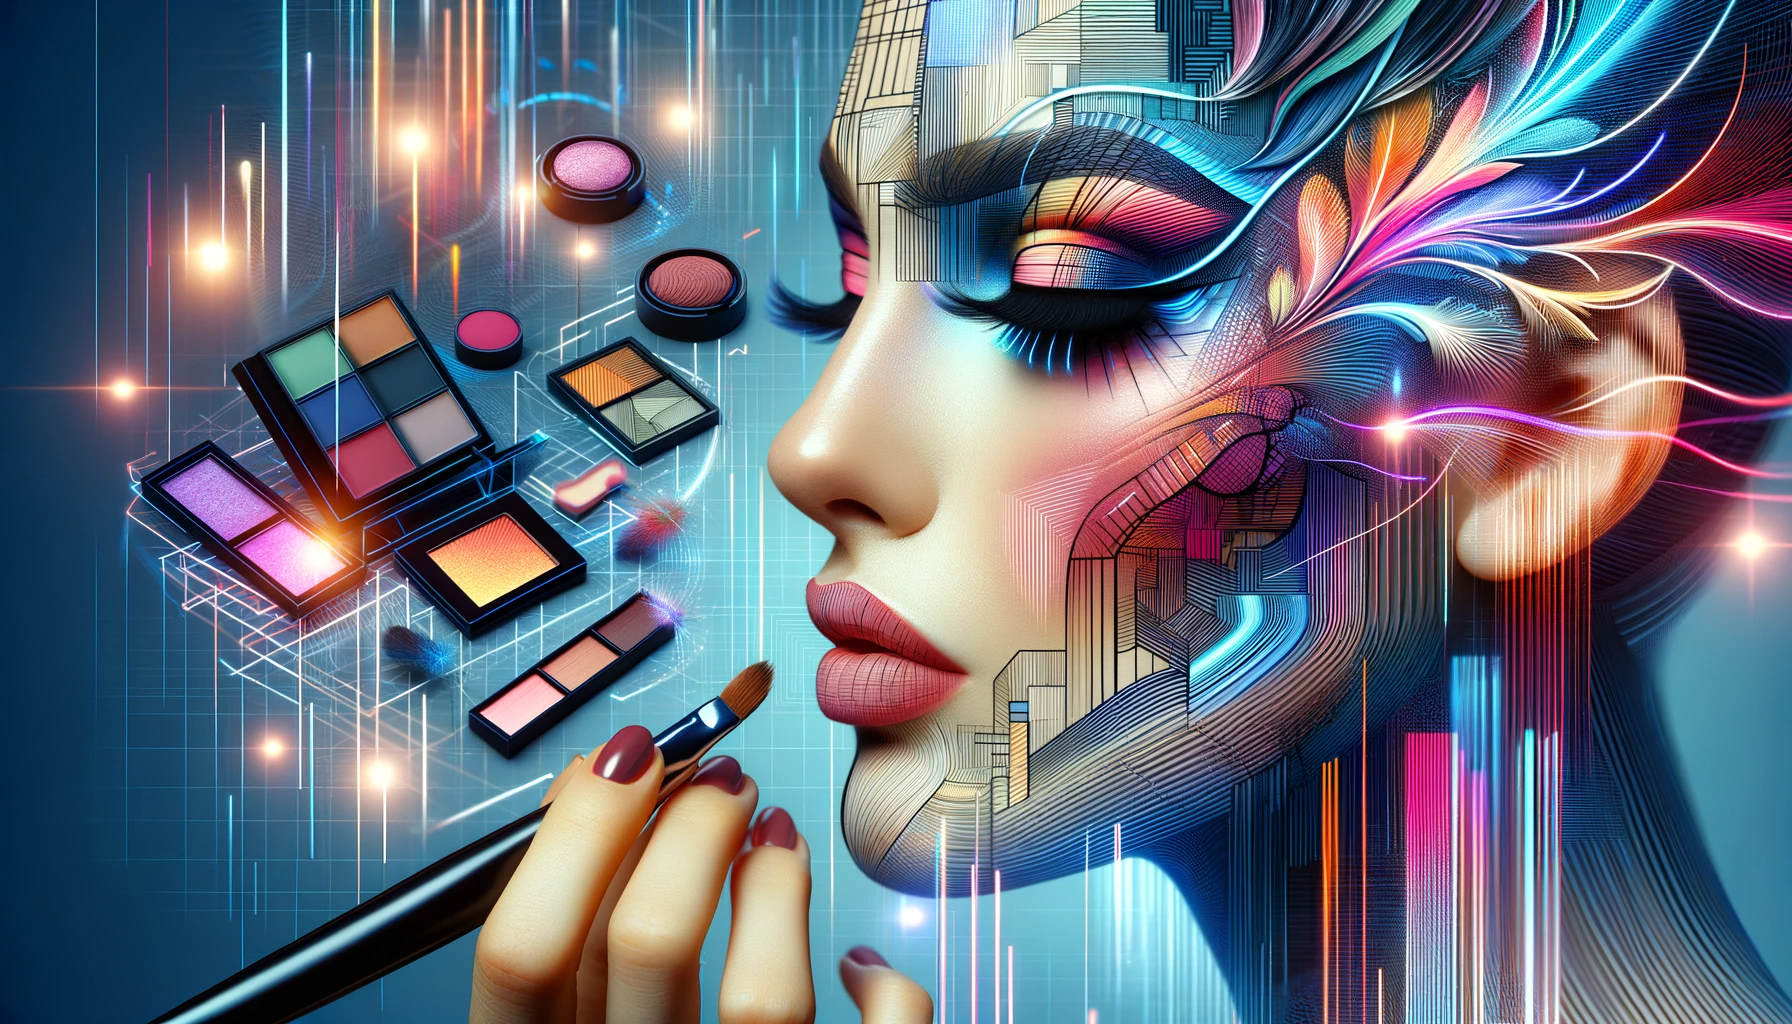 Face Art in the Digital Age